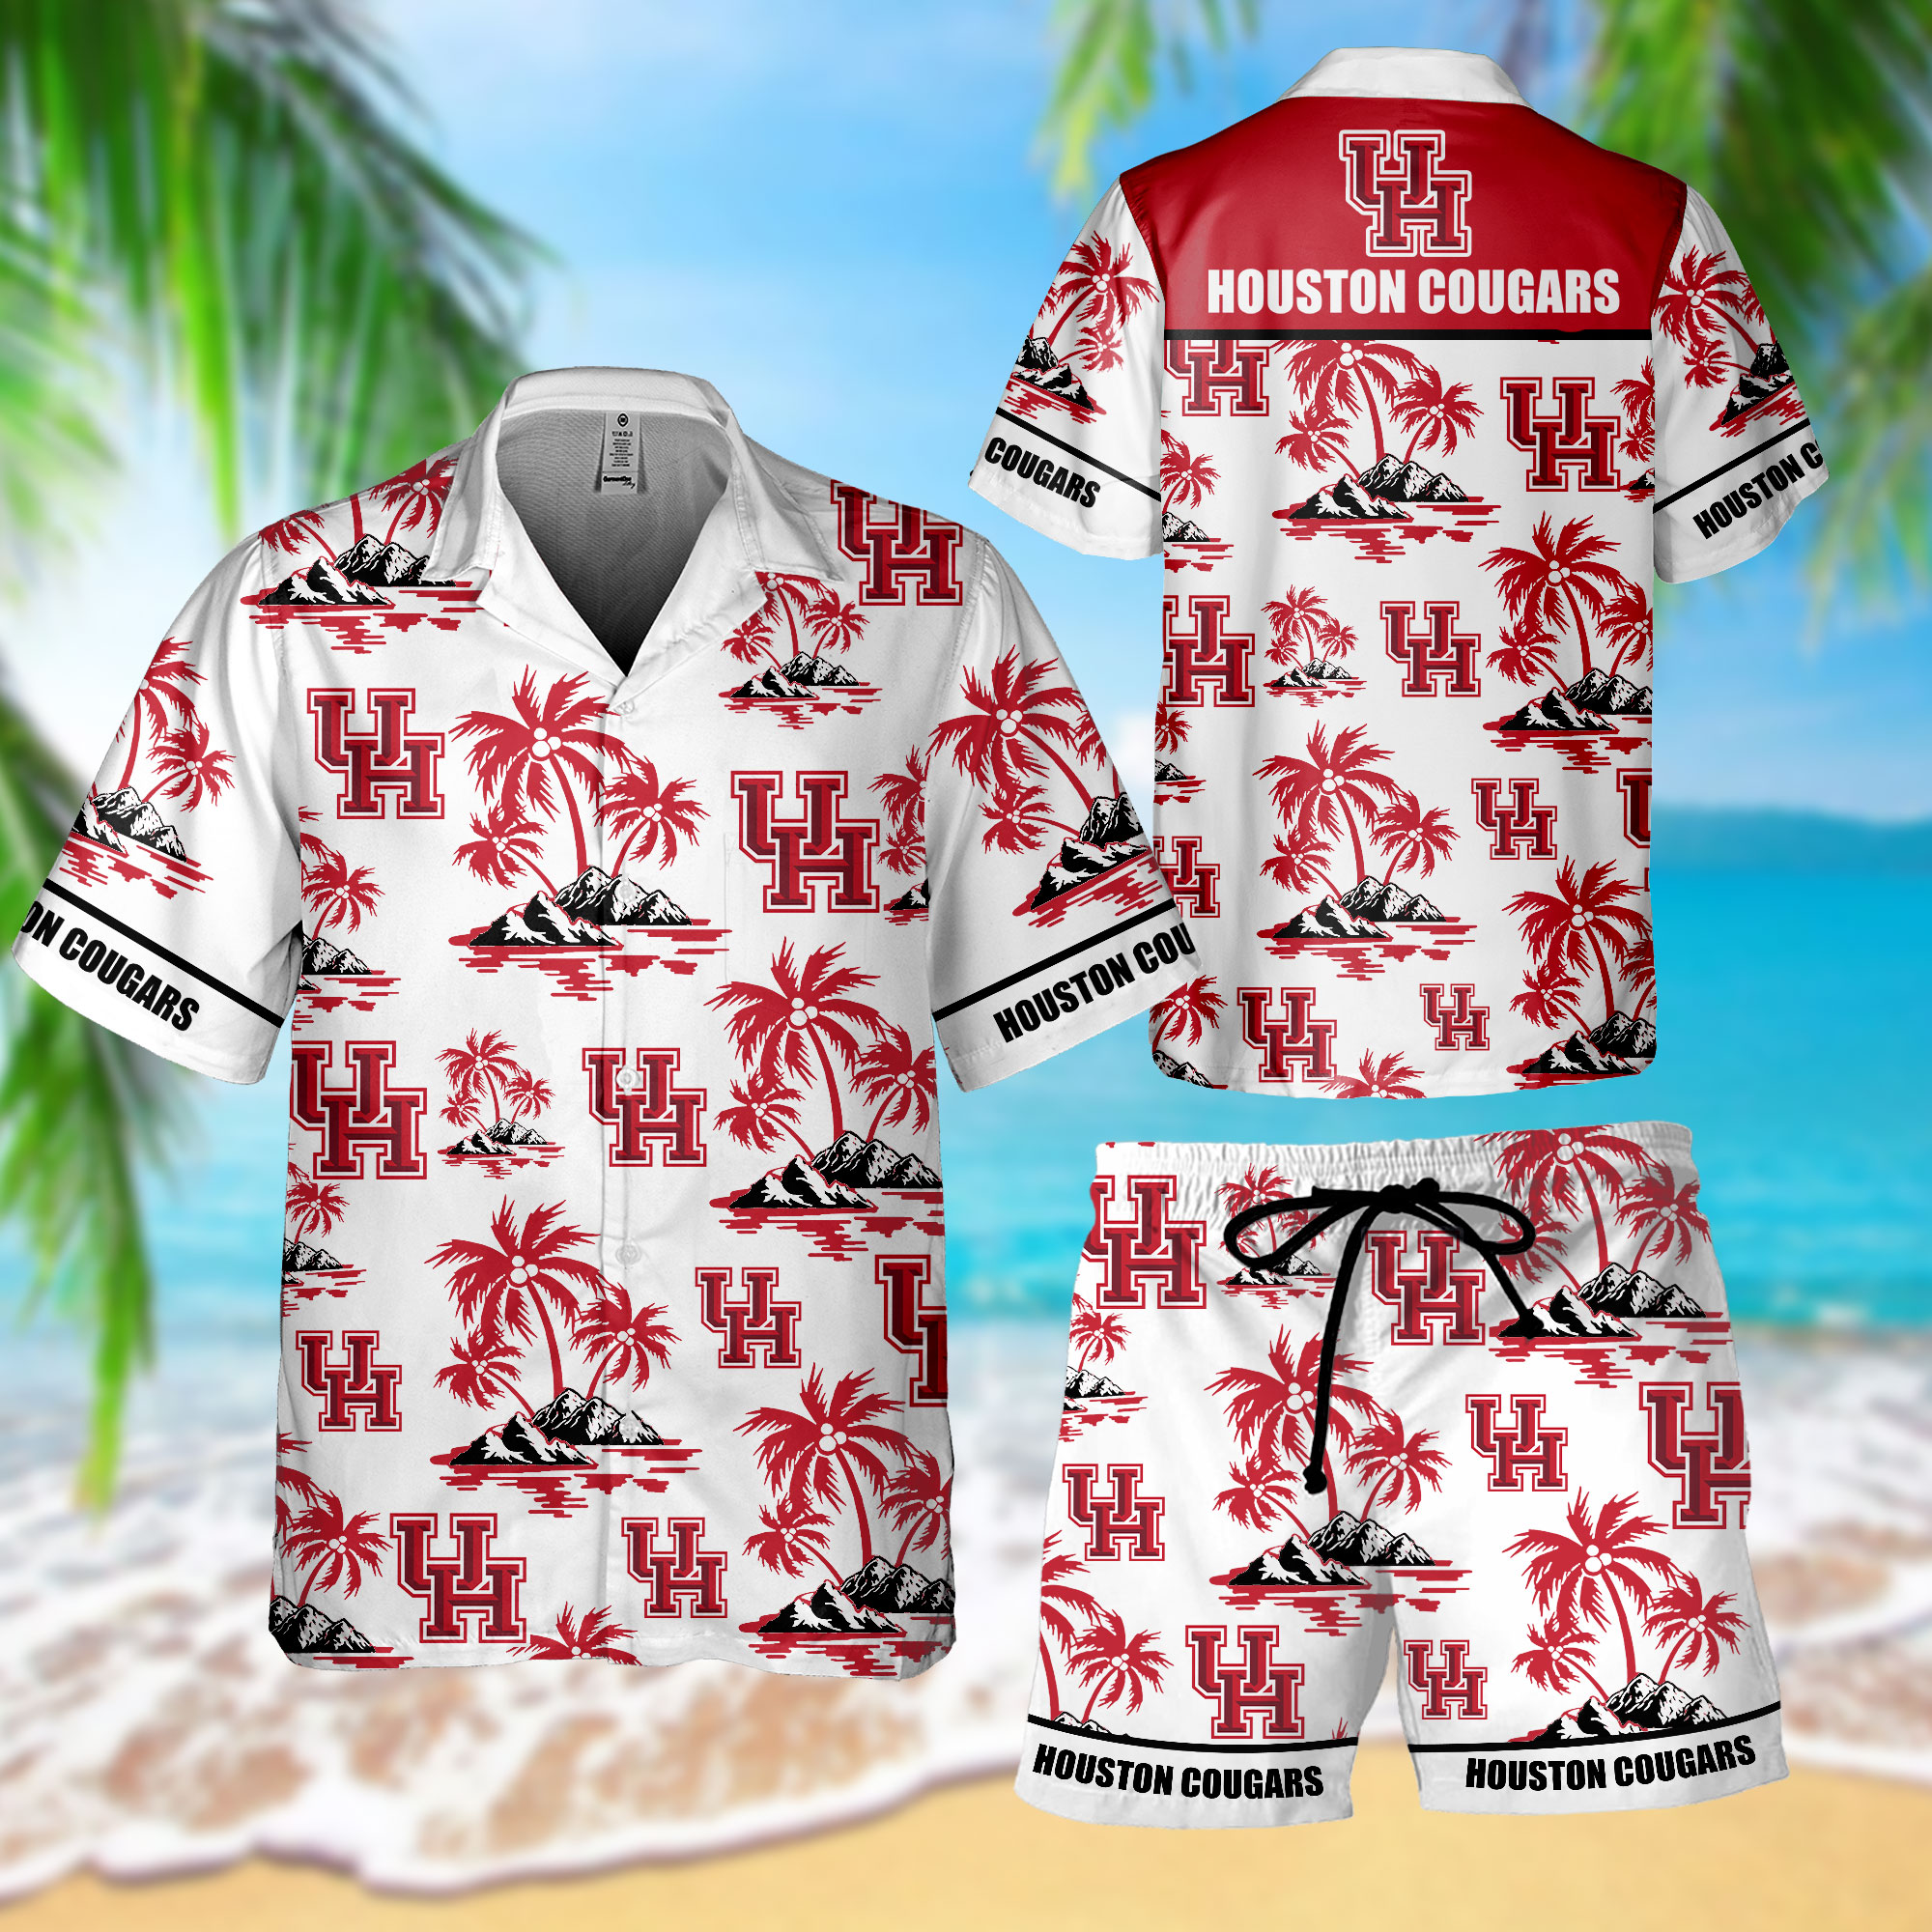 Let me show you about some combo hawaiian shirt so cool in this weather 49